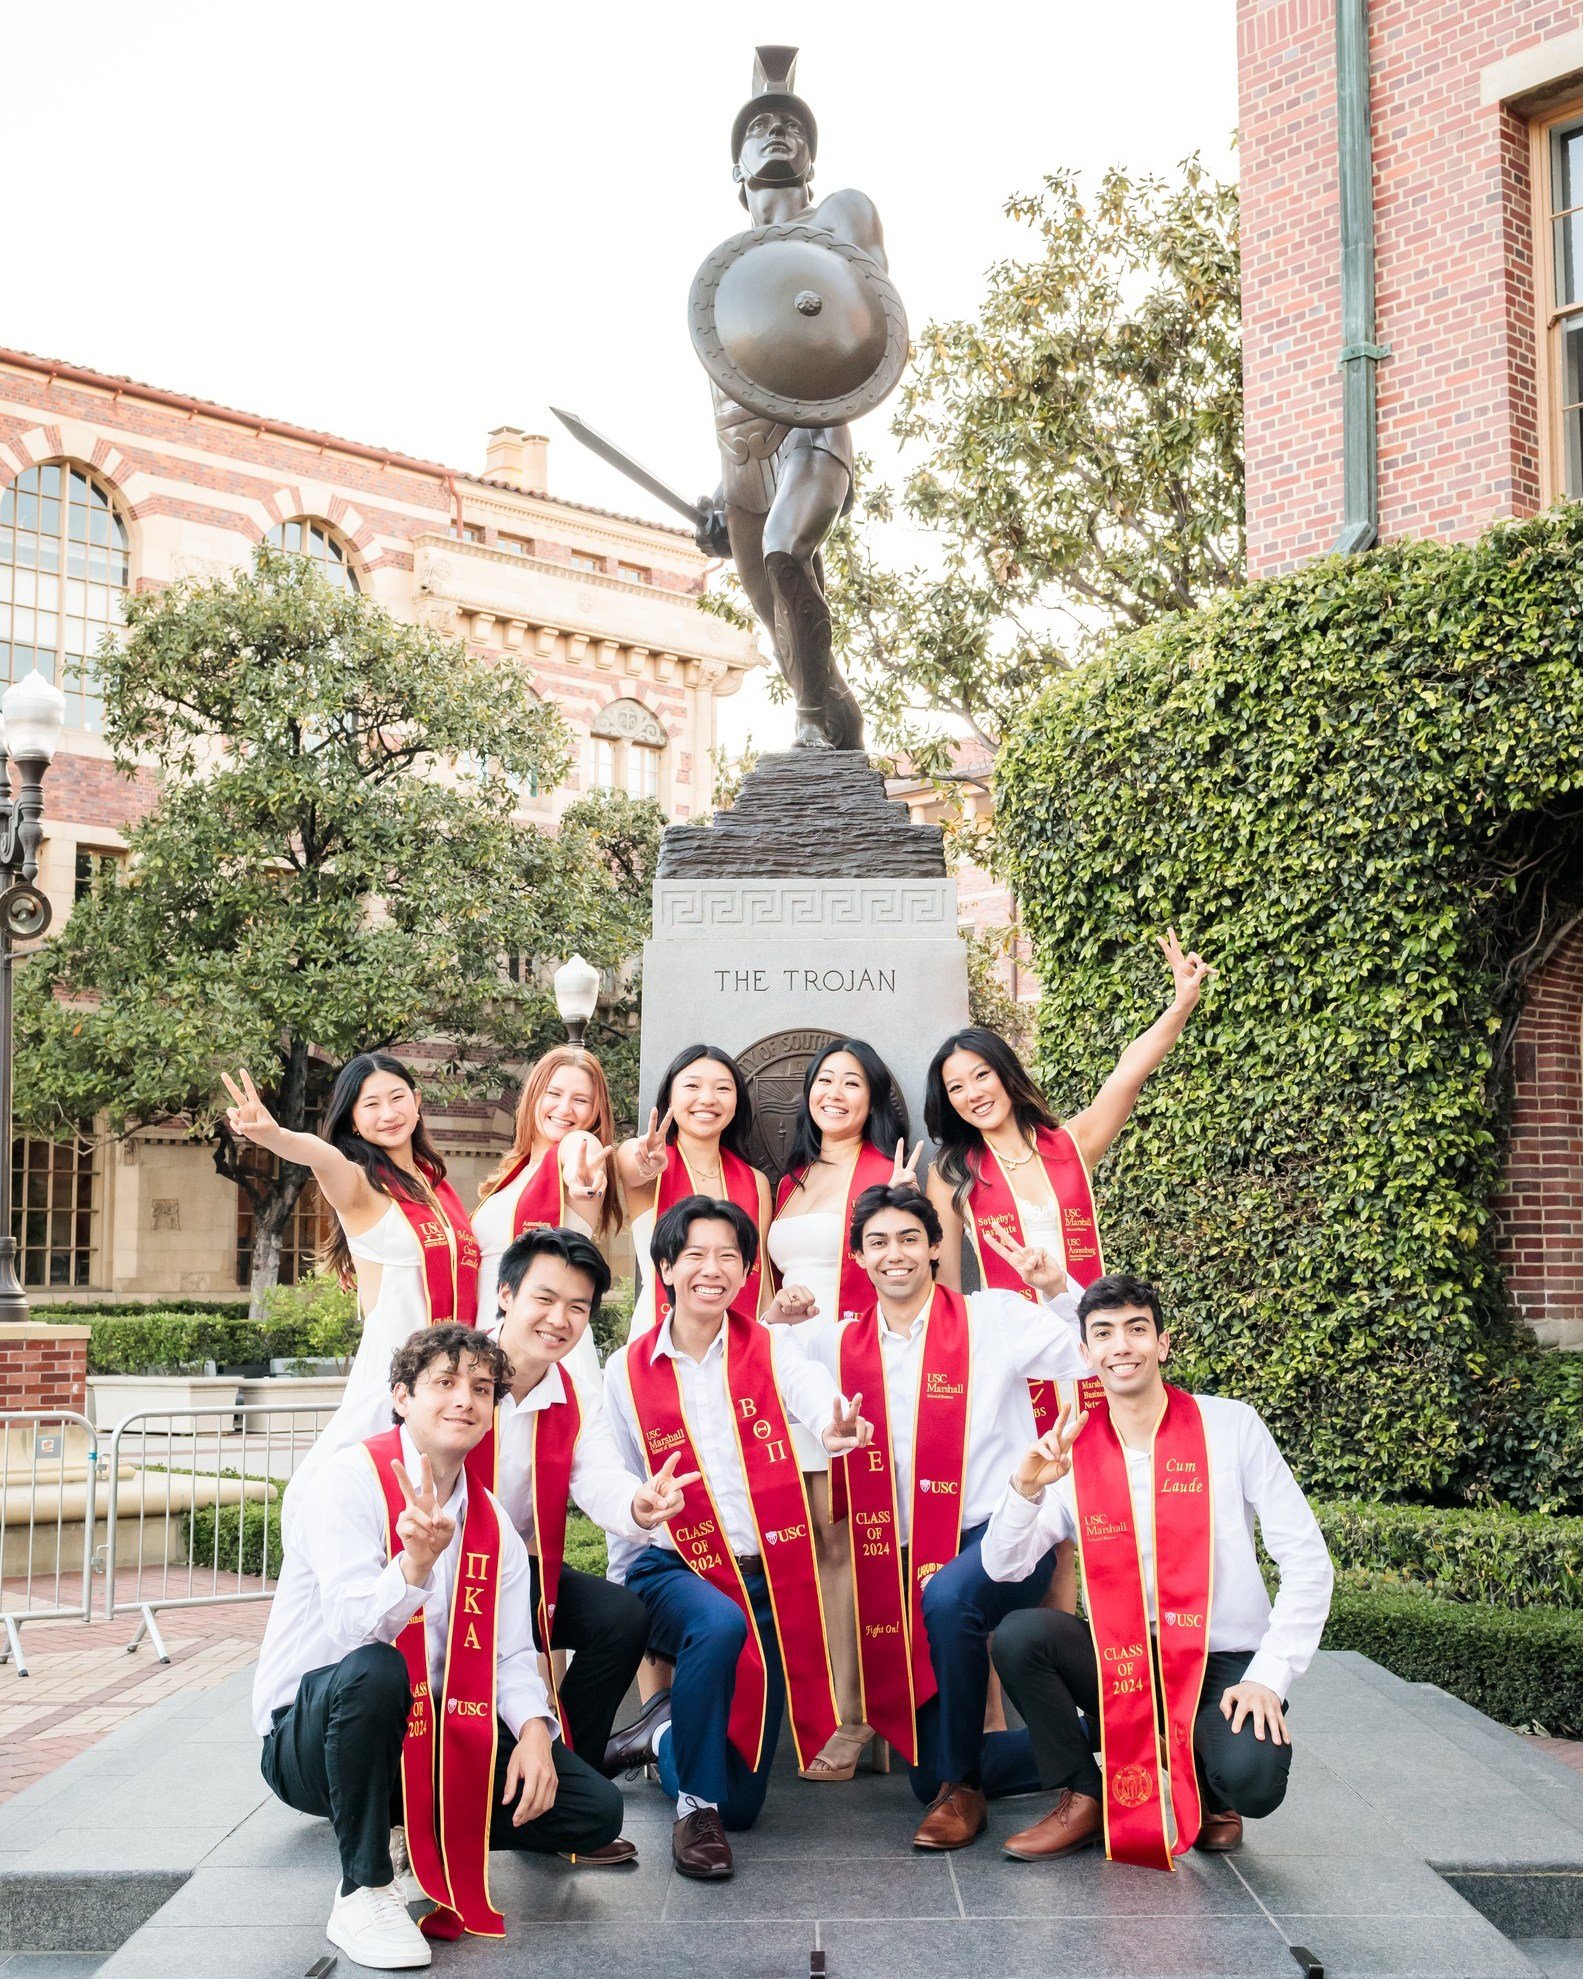 Faithful, Scholarly, Skillful, Courageous, and Ambitious.  These words are engraved on the pedestal where @tommytrojan resides and on the Steps of Troy in the Tutor Center.  After working with hundreds of USC graduates, I can assure you these words a